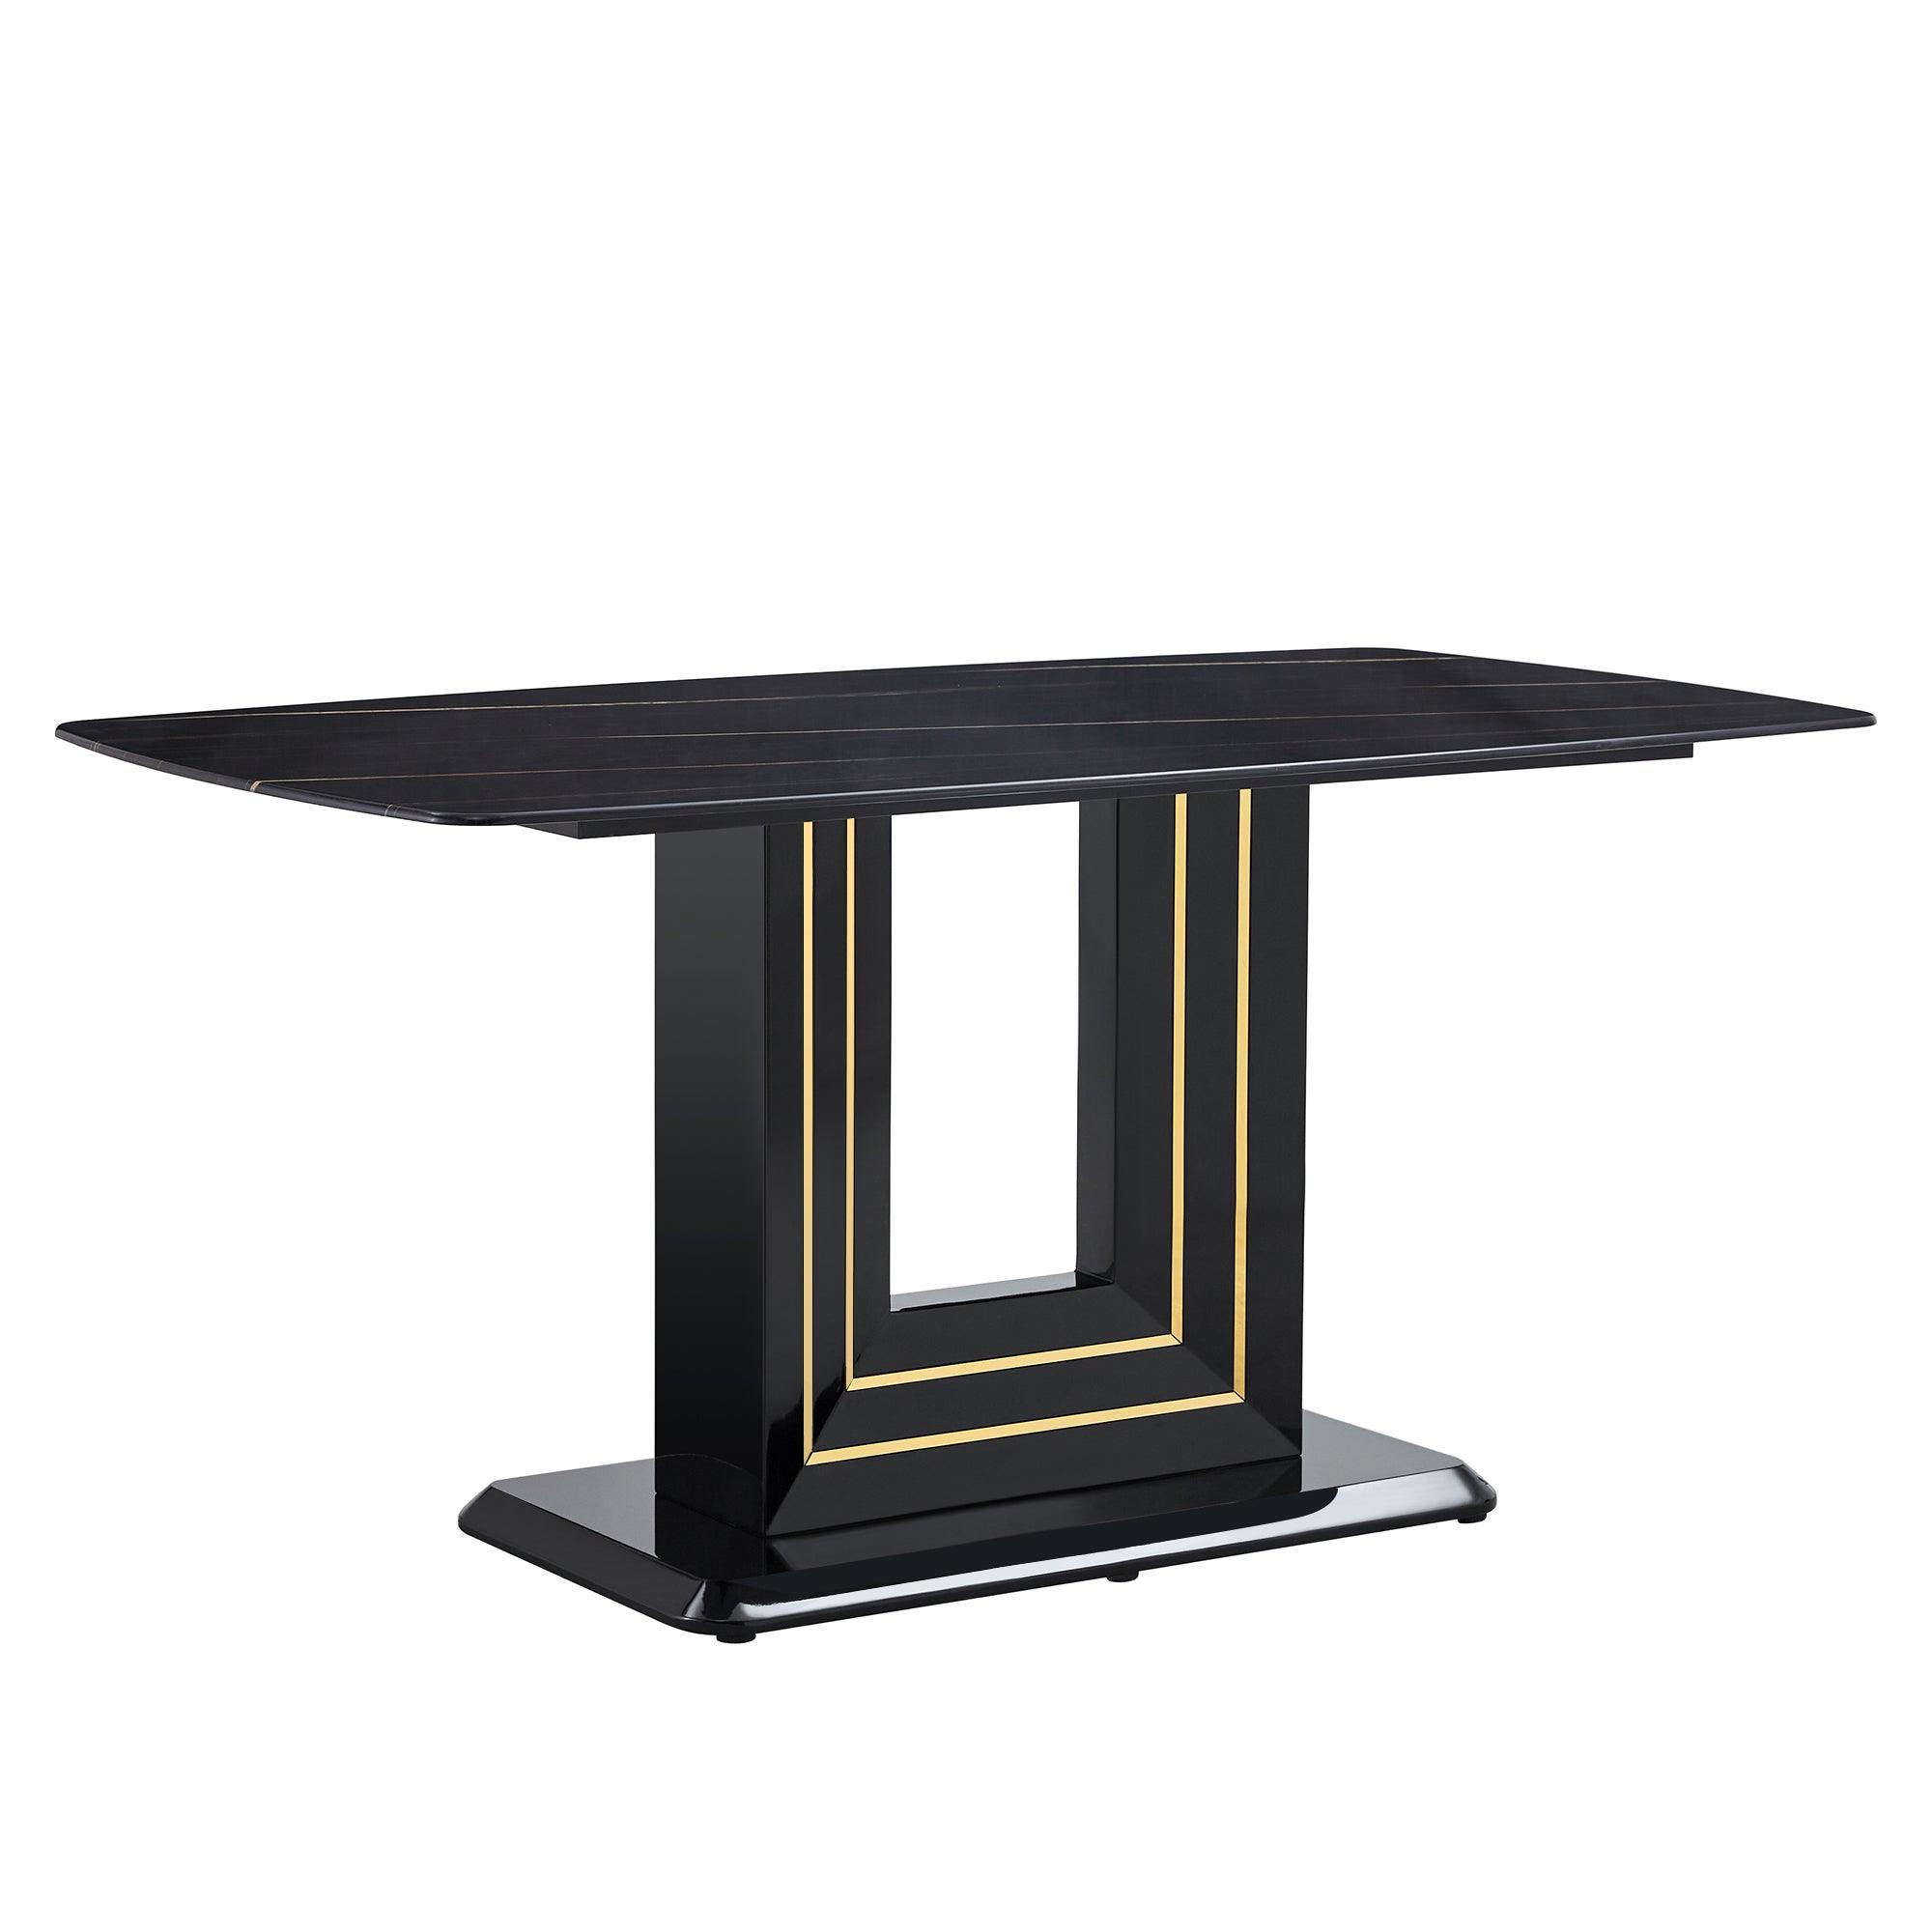 🆓🚛 Rectangular 63" Marble Dining Table, Luxurious Dining Room Table With Faux Marble Top & U-Shape Mdf Base, Modern Kitchen Dining Table for Kitchen Living Dining Room